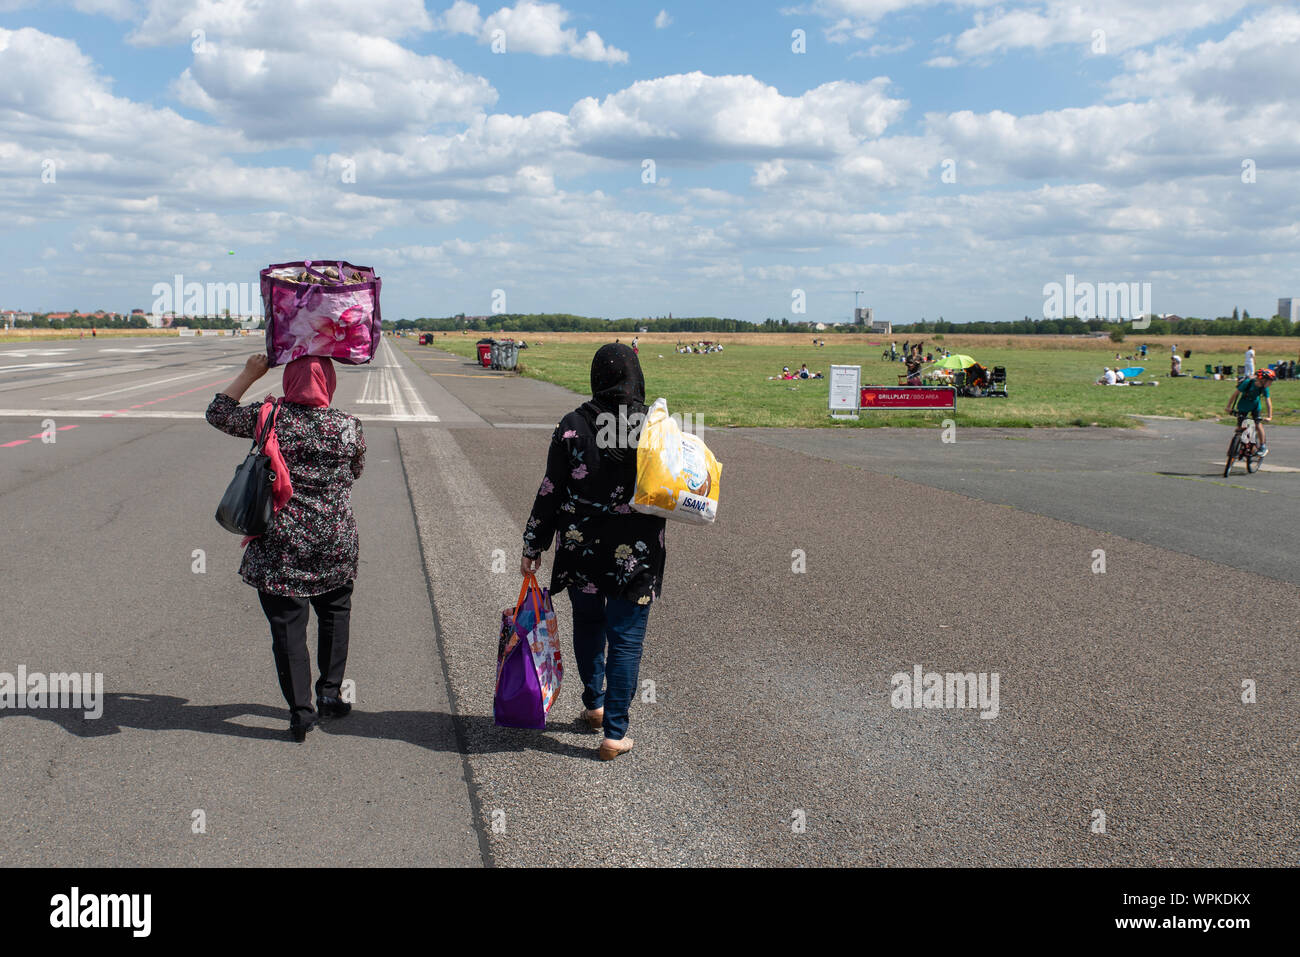 On a Sunday 2 muslim women arrive in Tempelhof airport  where they'll spend the rest of the day eating and relaxing, Berlin, Germany. Stock Photo